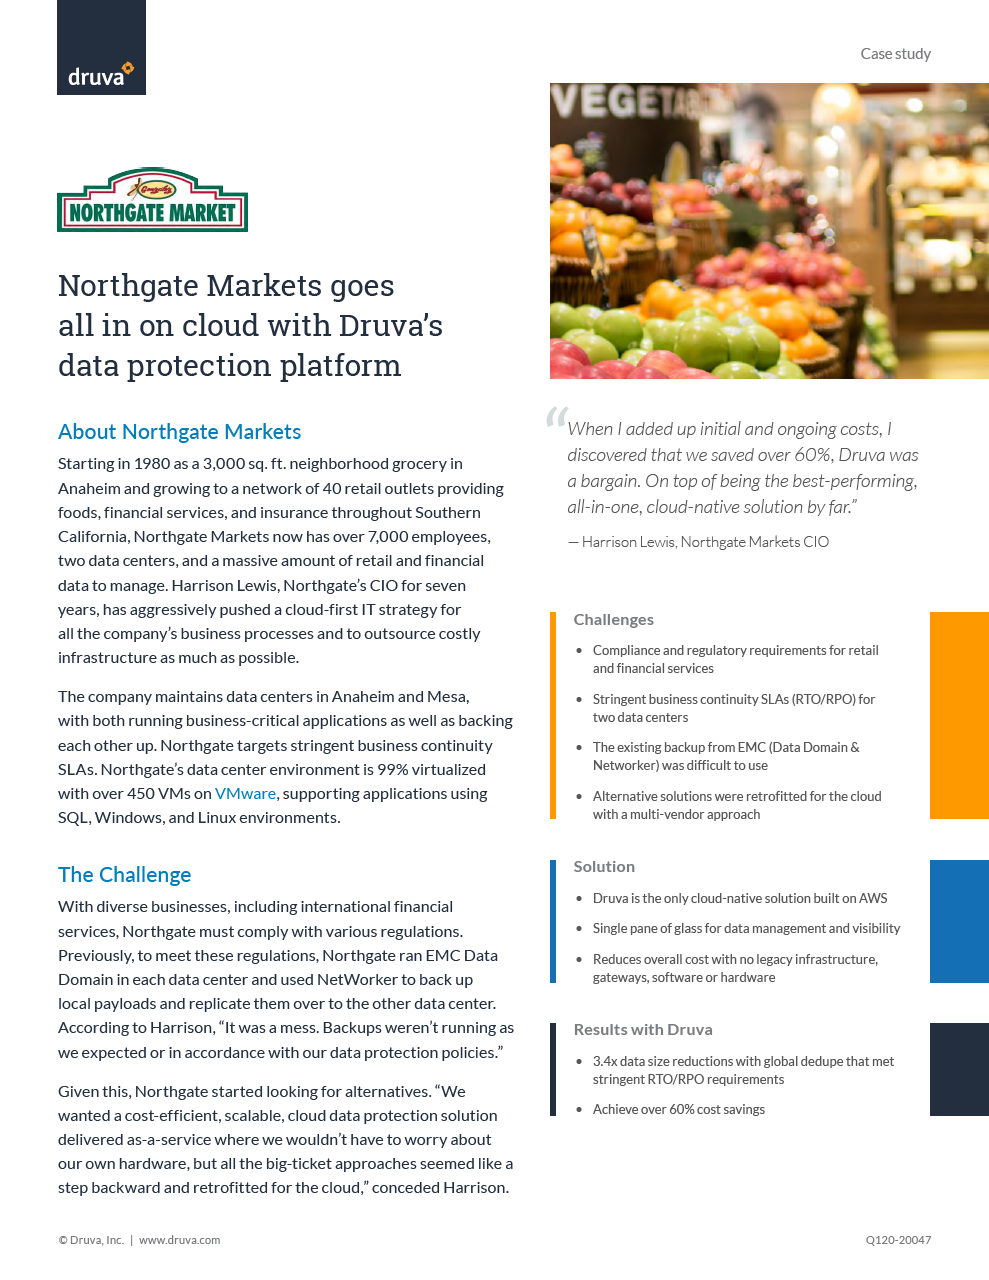 Northgate Markets goes all in on cloud with Druva's data protection platform